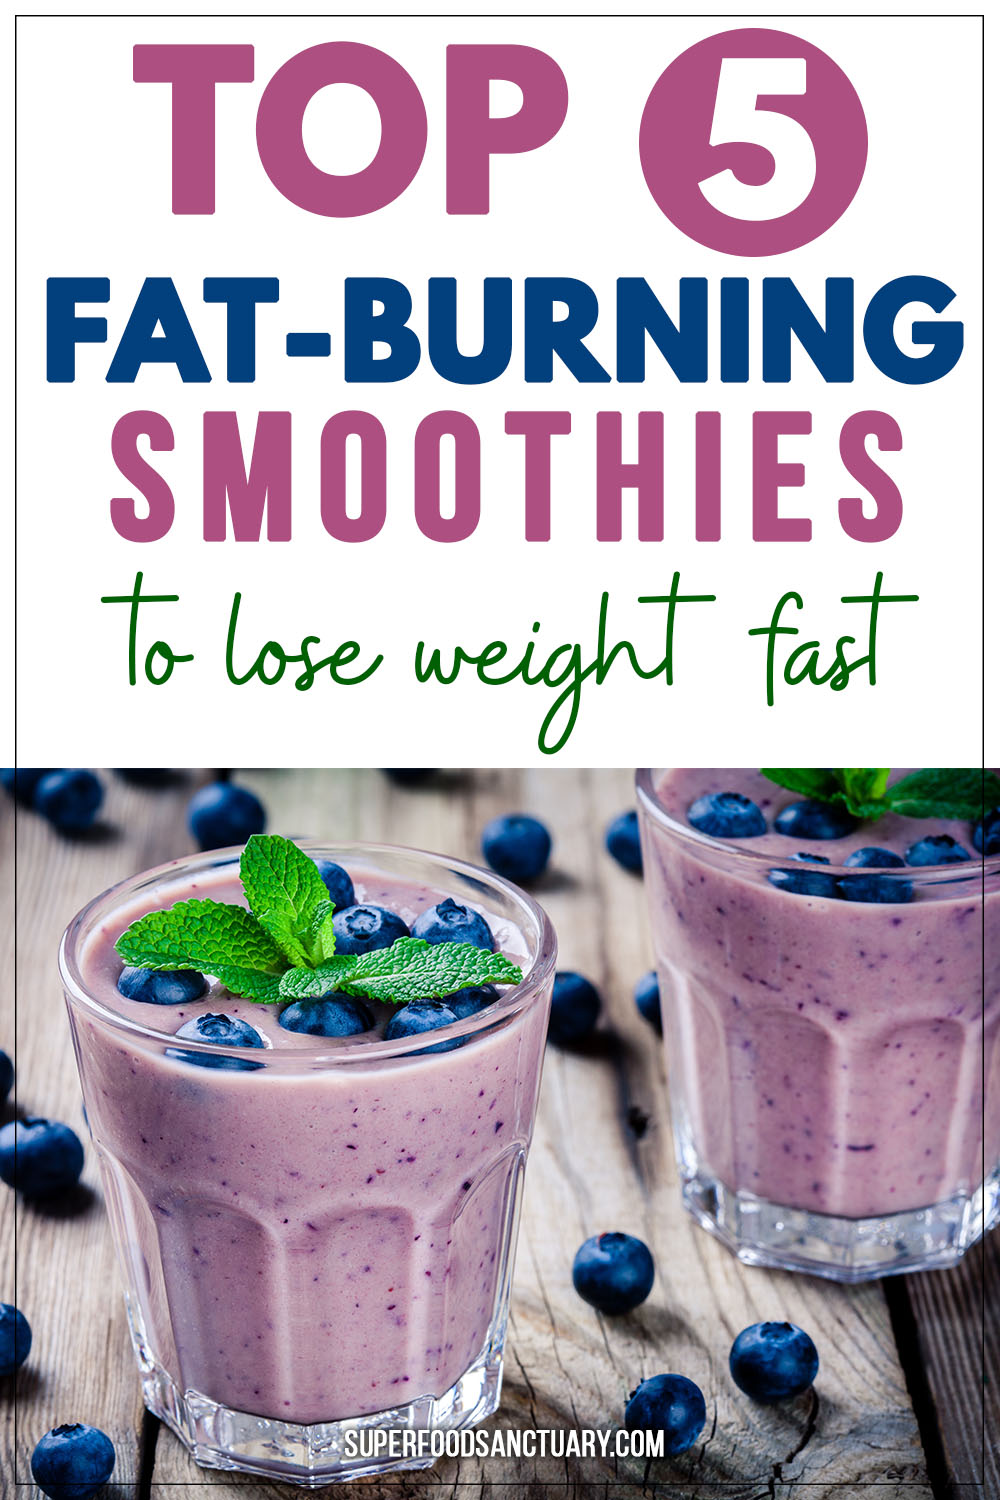 FAT BURNING SMOOTHIES FOR WEIGHT LOSS 